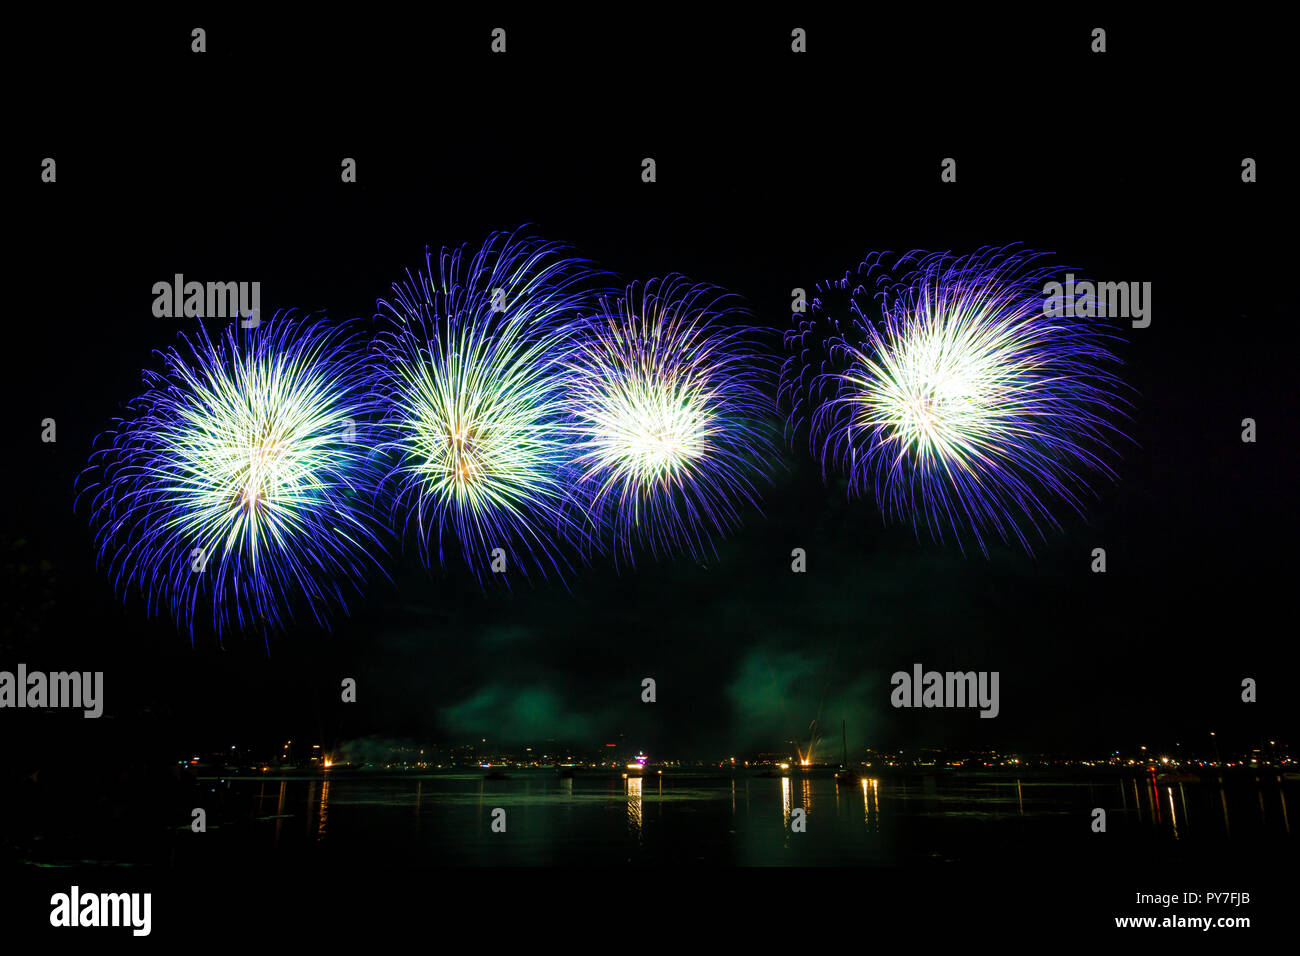 Four blue fire balls of explosions of fireworks in night water landscape Stock Photo